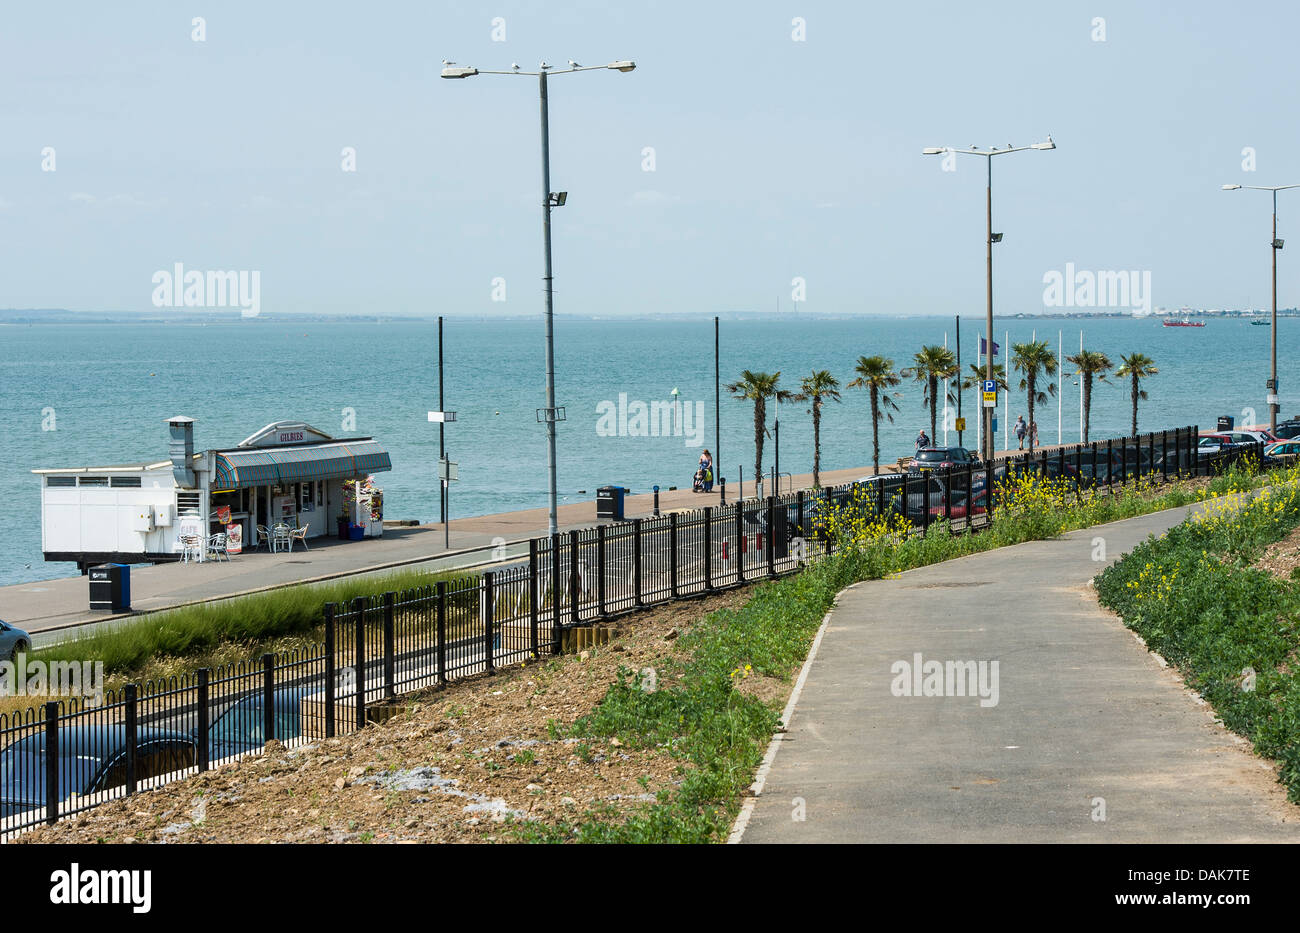 Promenade and seafront at Southend on sea, Essex, UK. Stock Photo